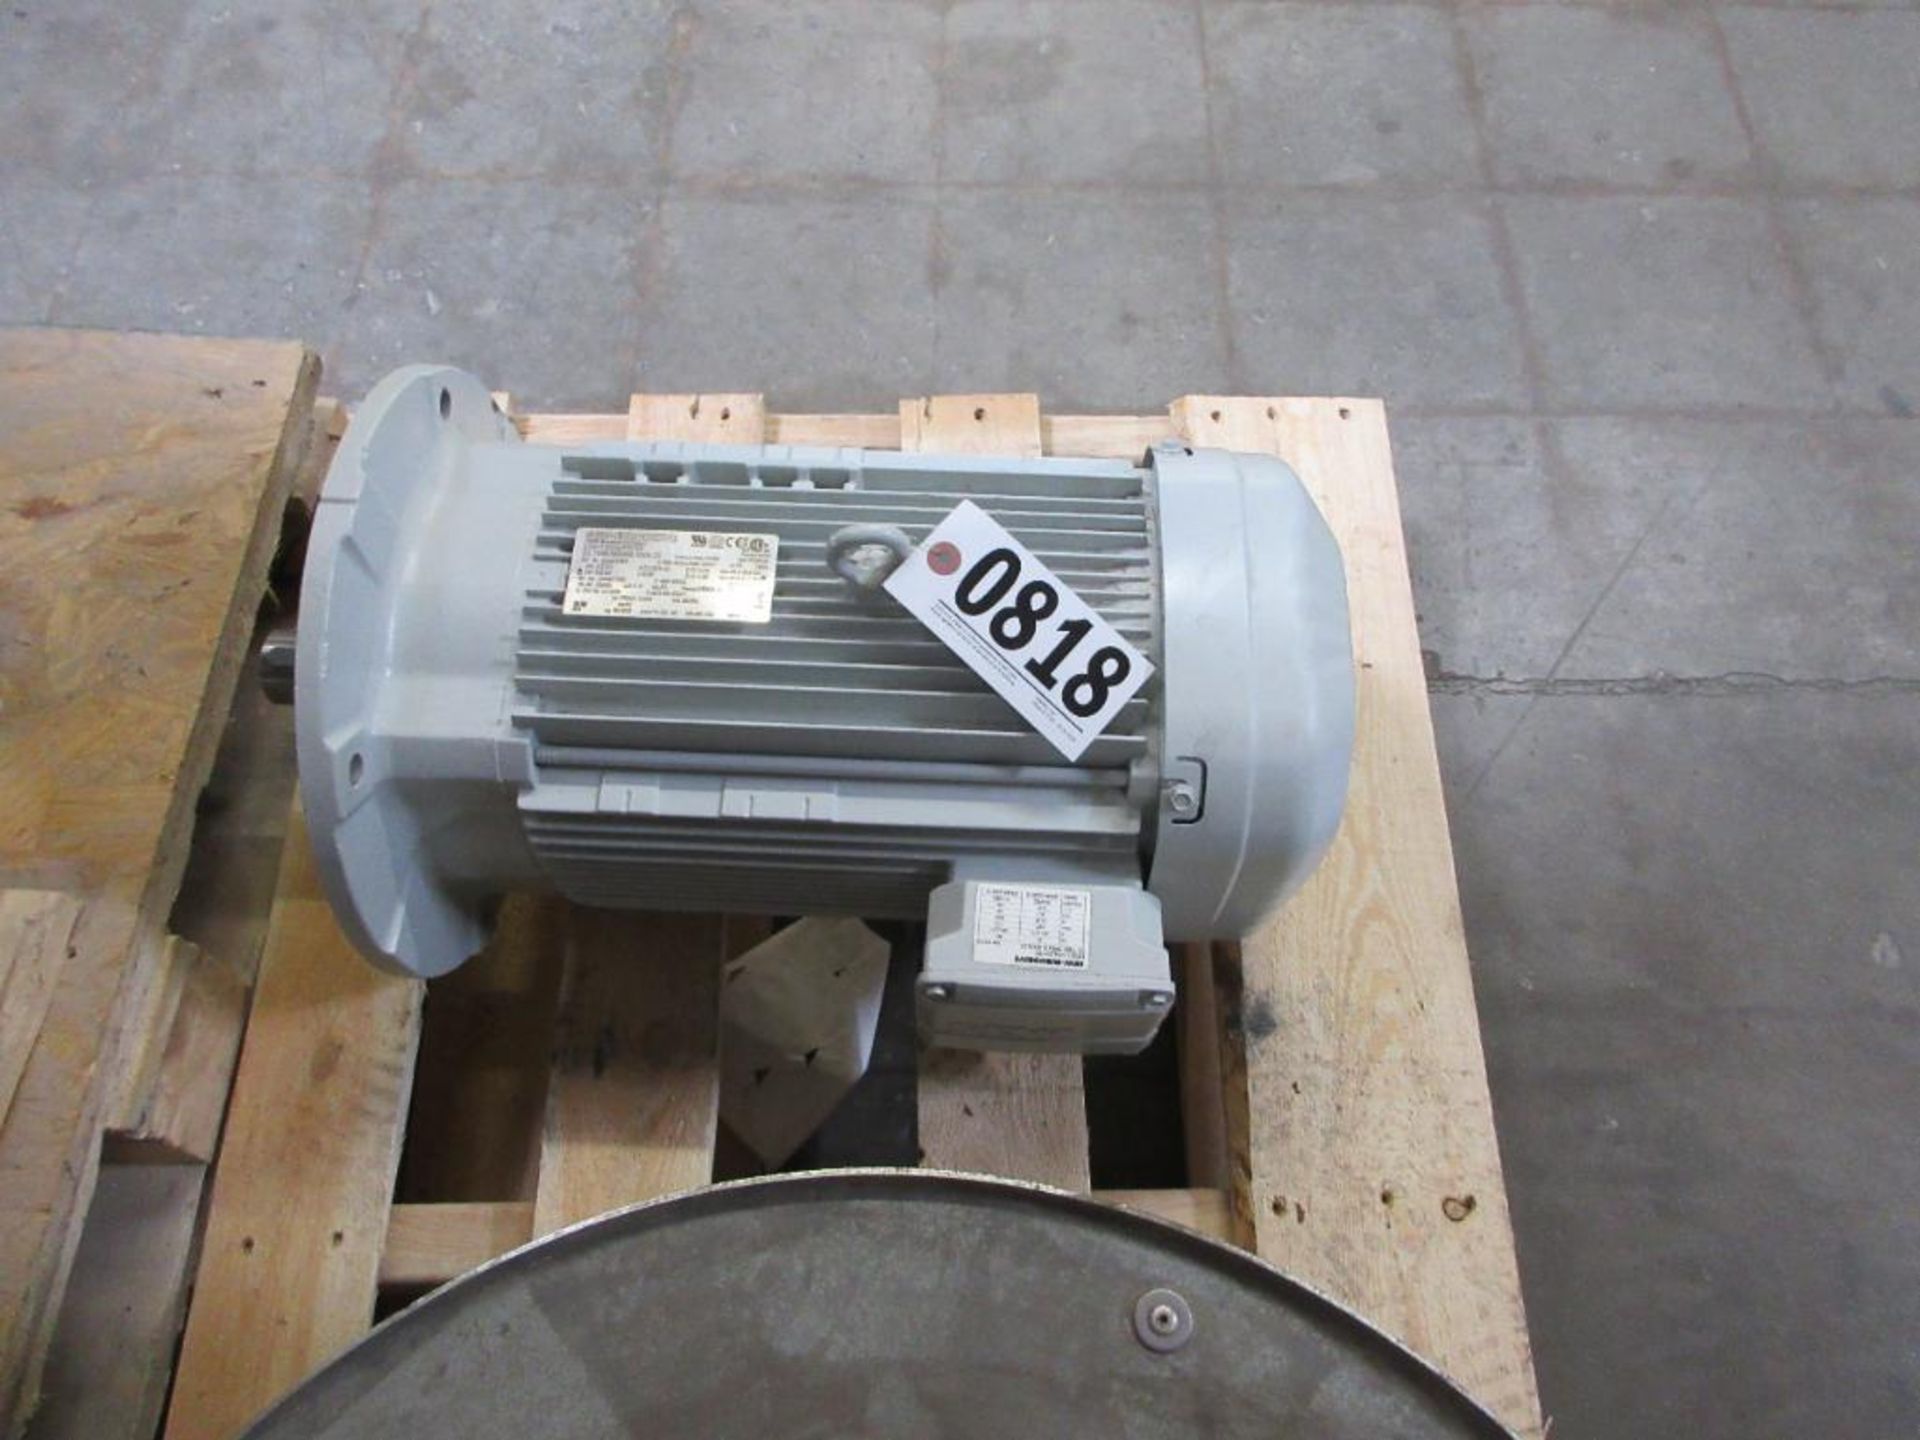 SEW EURODRIVE DRN1325S4/FF/TF 5.5kW 1464 RPM FF265 FRAME ELECTRIC MOTOR (THIS LOT IS FOB CAMARILLO C - Image 4 of 5